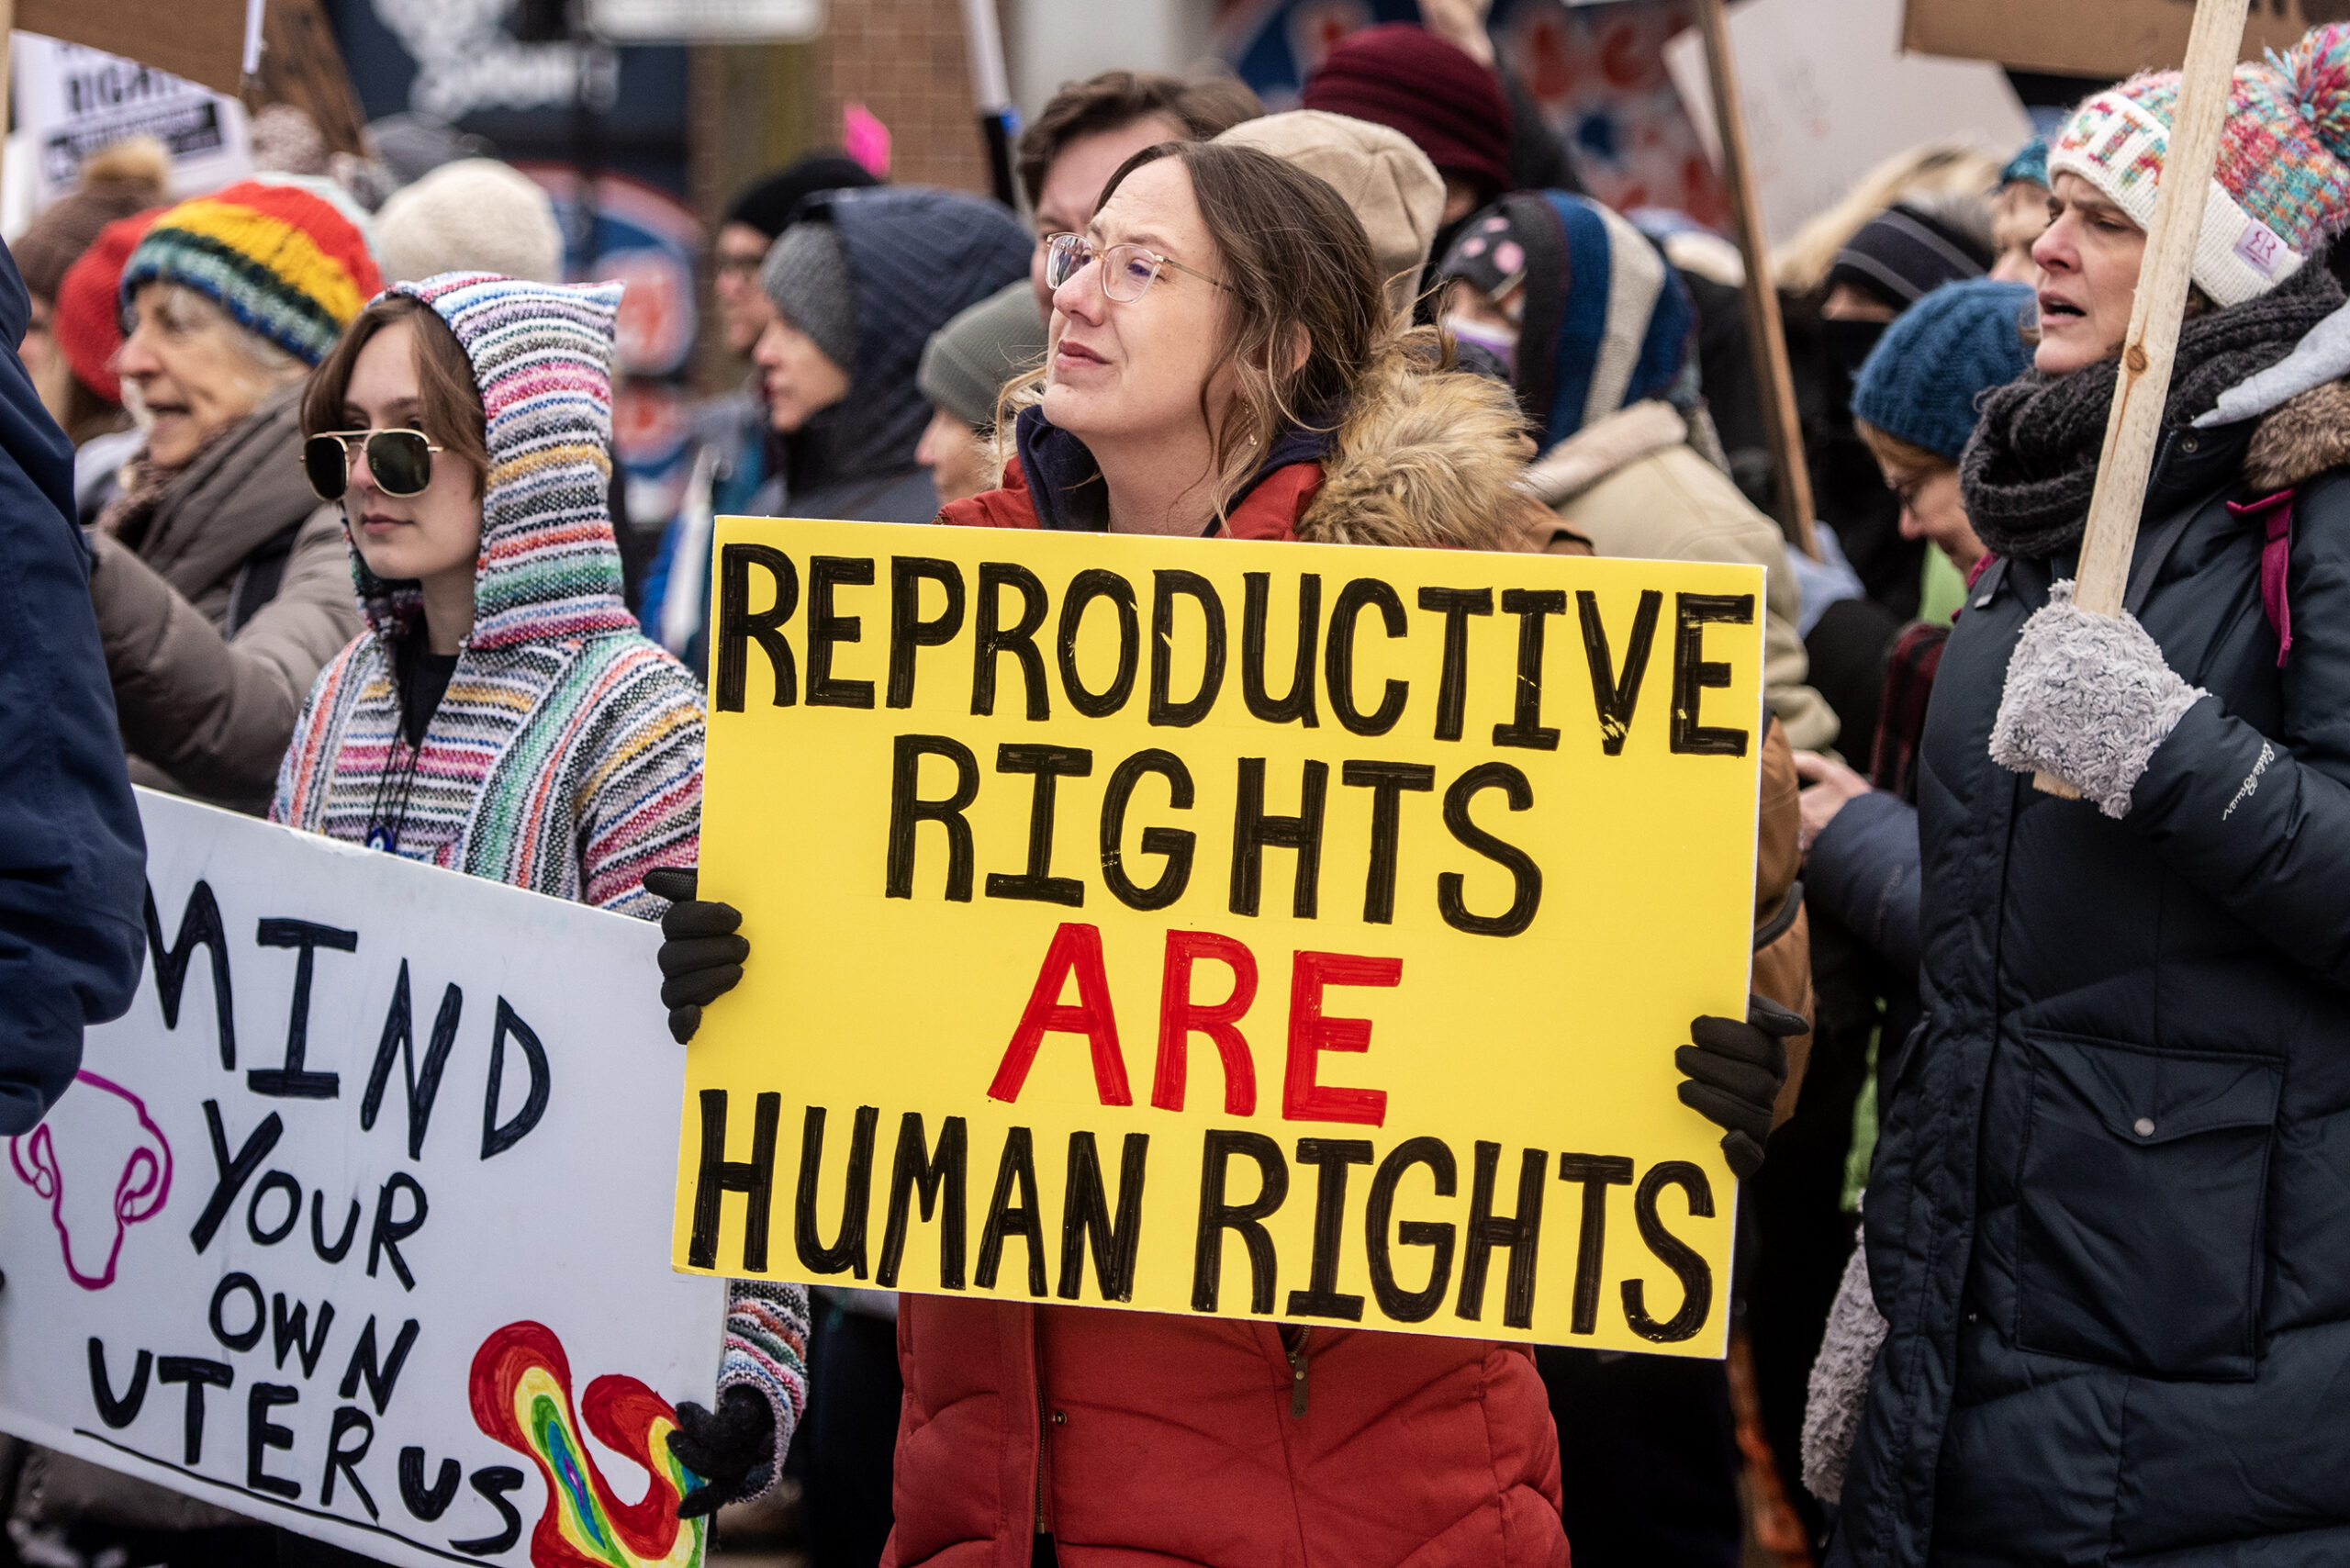 A protester's yellow sign reads "Reproductive rights are human rights."